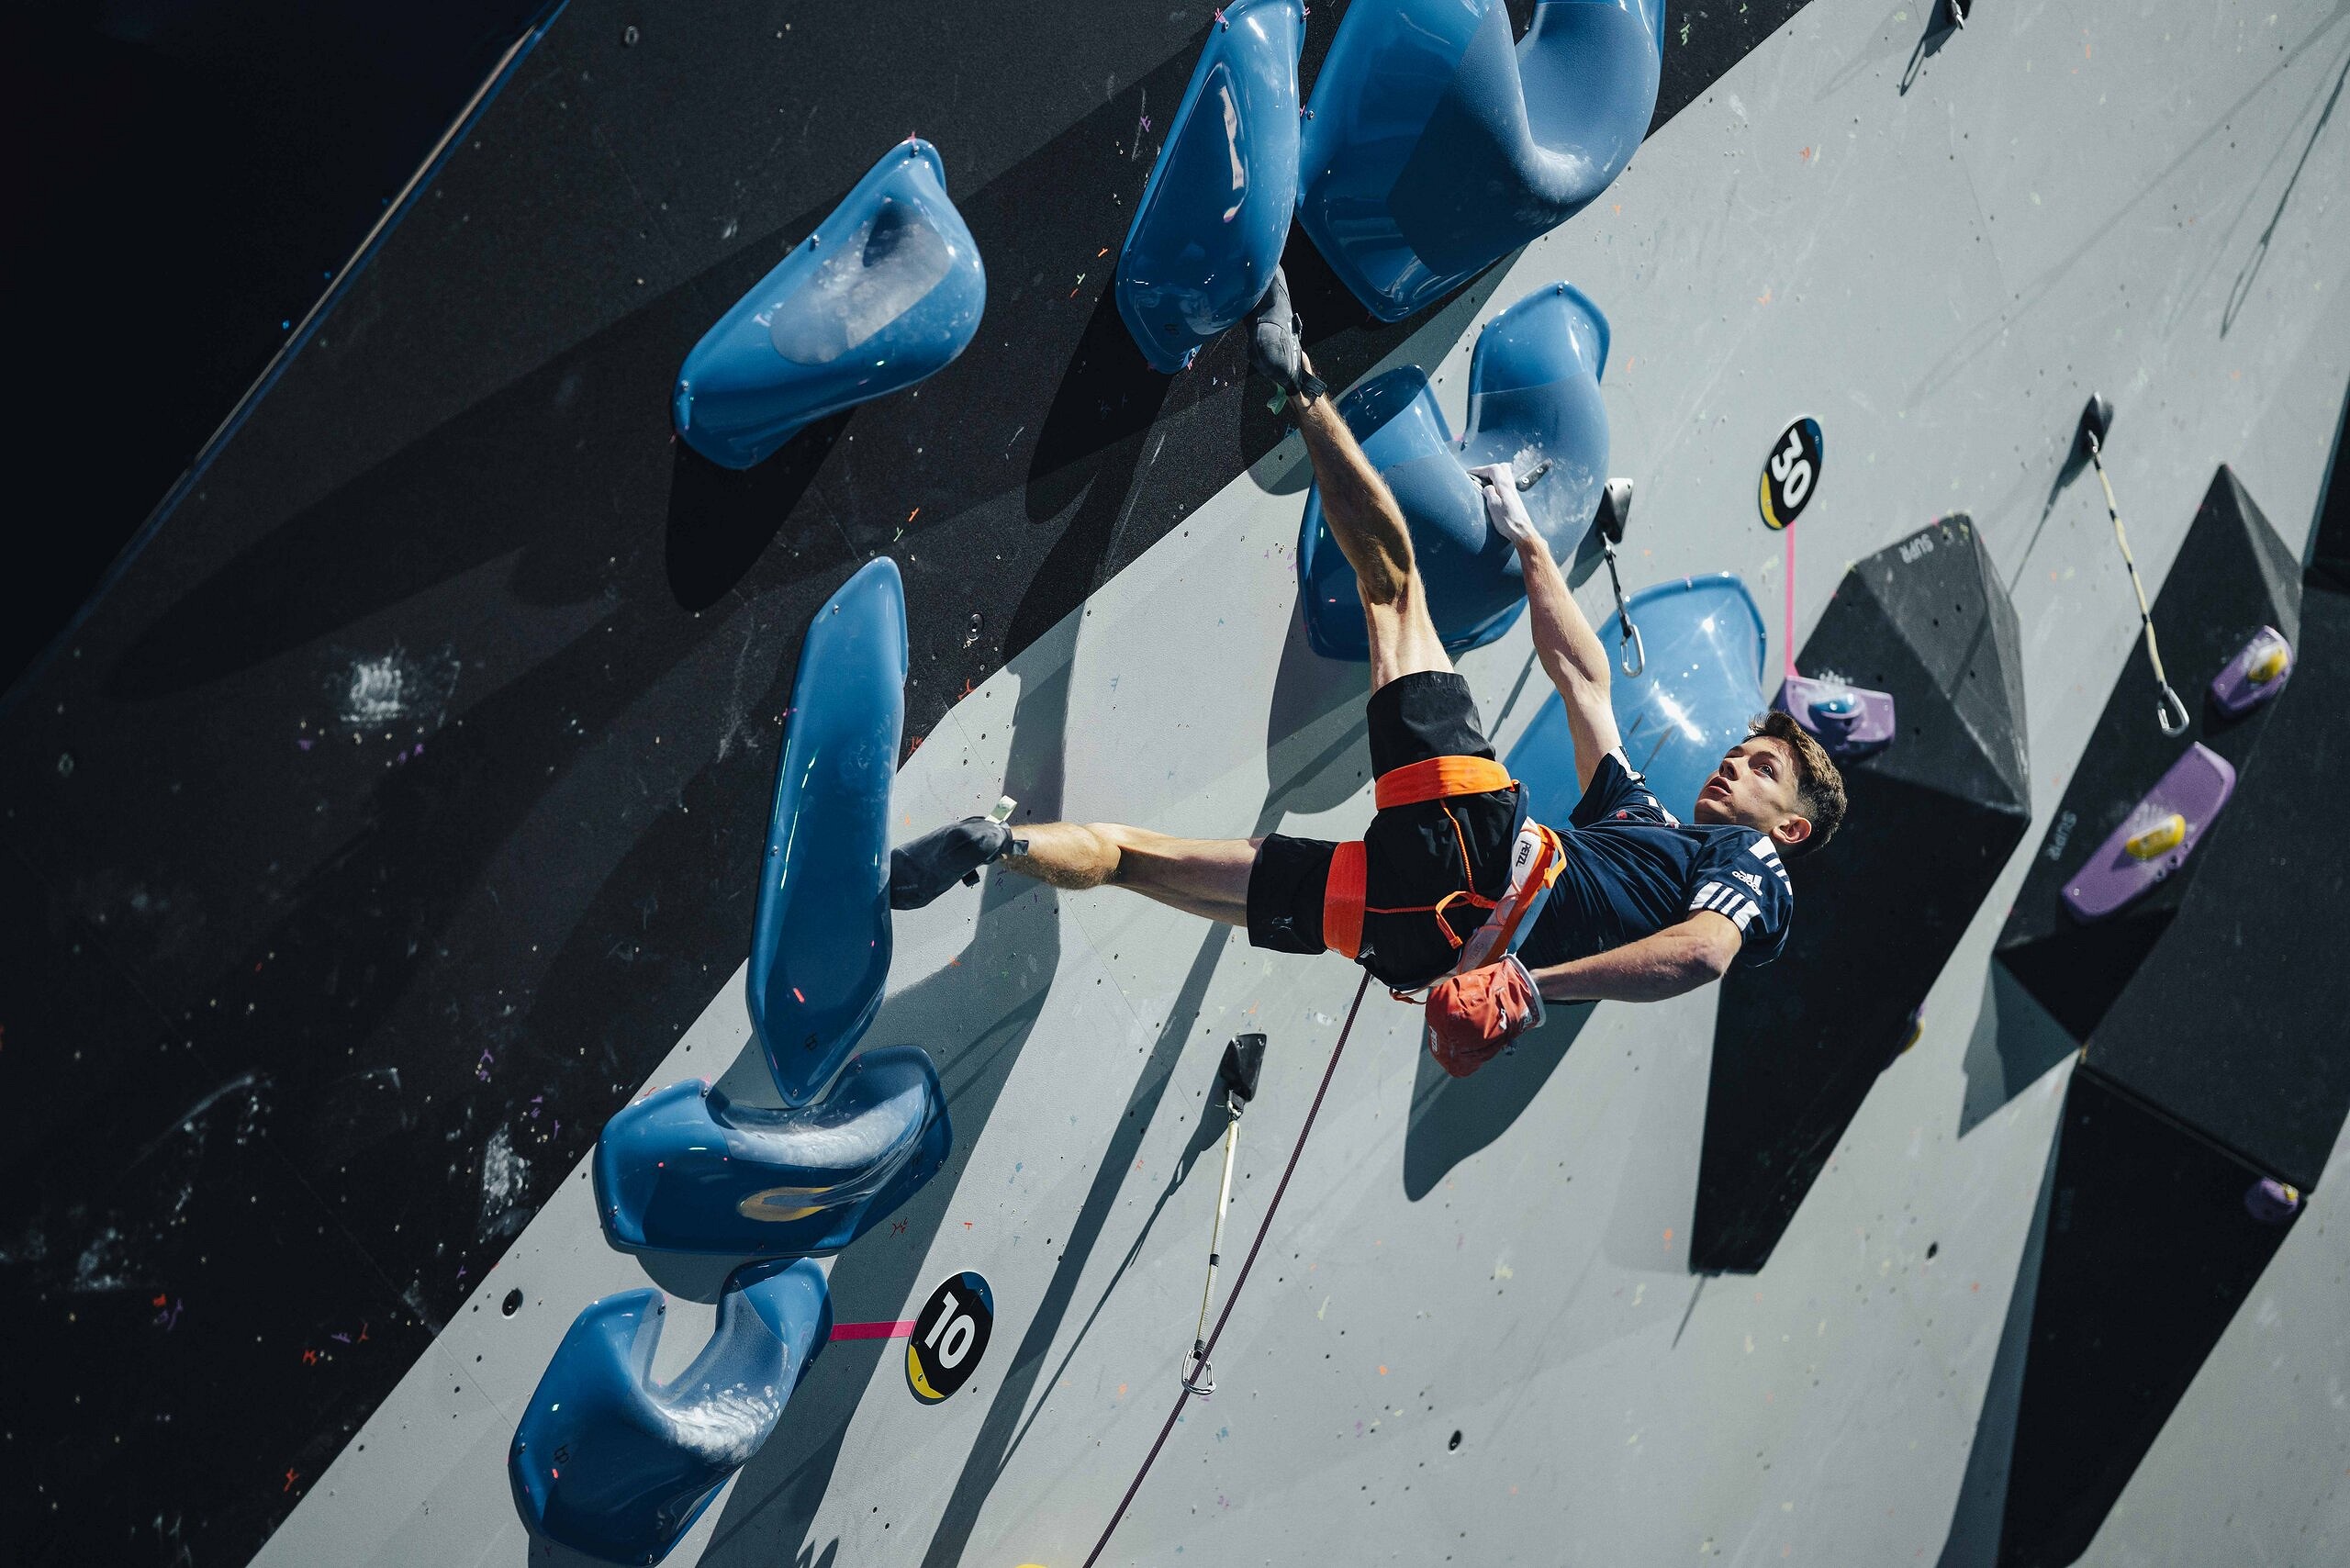 Toby Roberts is on his way to the Boulder & Lead finals.  © Lena Drapella/IFSC